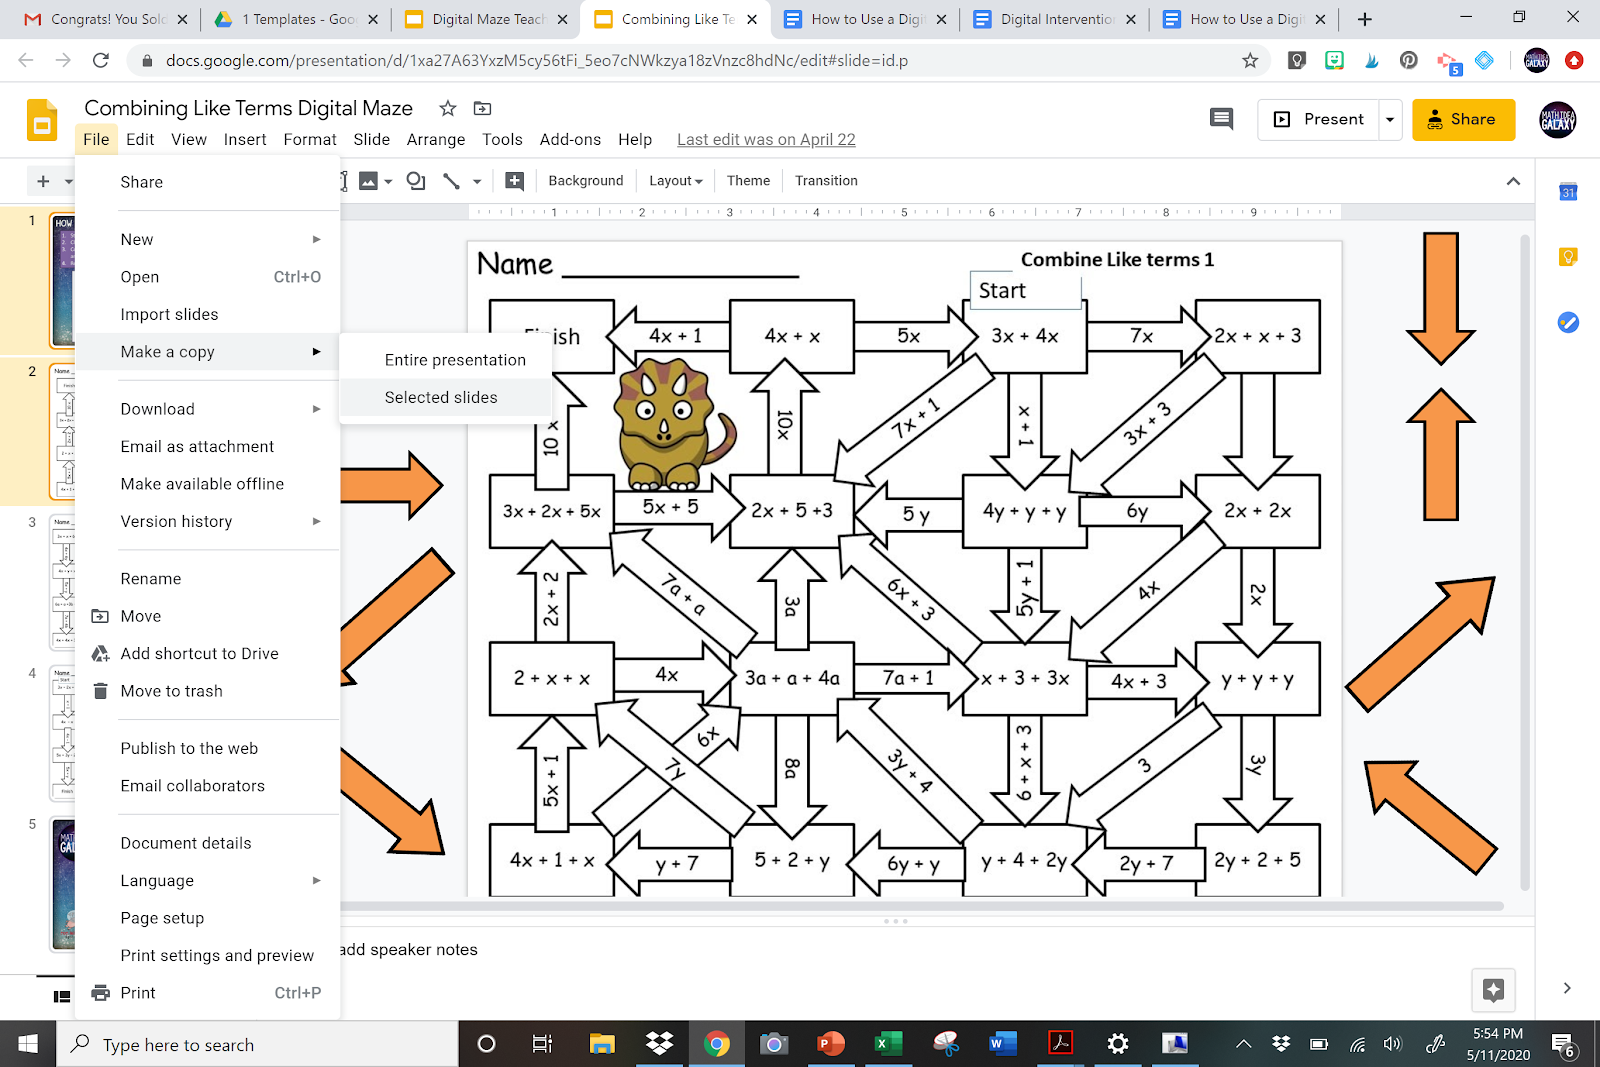 Read more about how digital math mazes are a great option for distance learning and hybrid learning. Created in Google Slides they can be assigned with ease. Check them out.